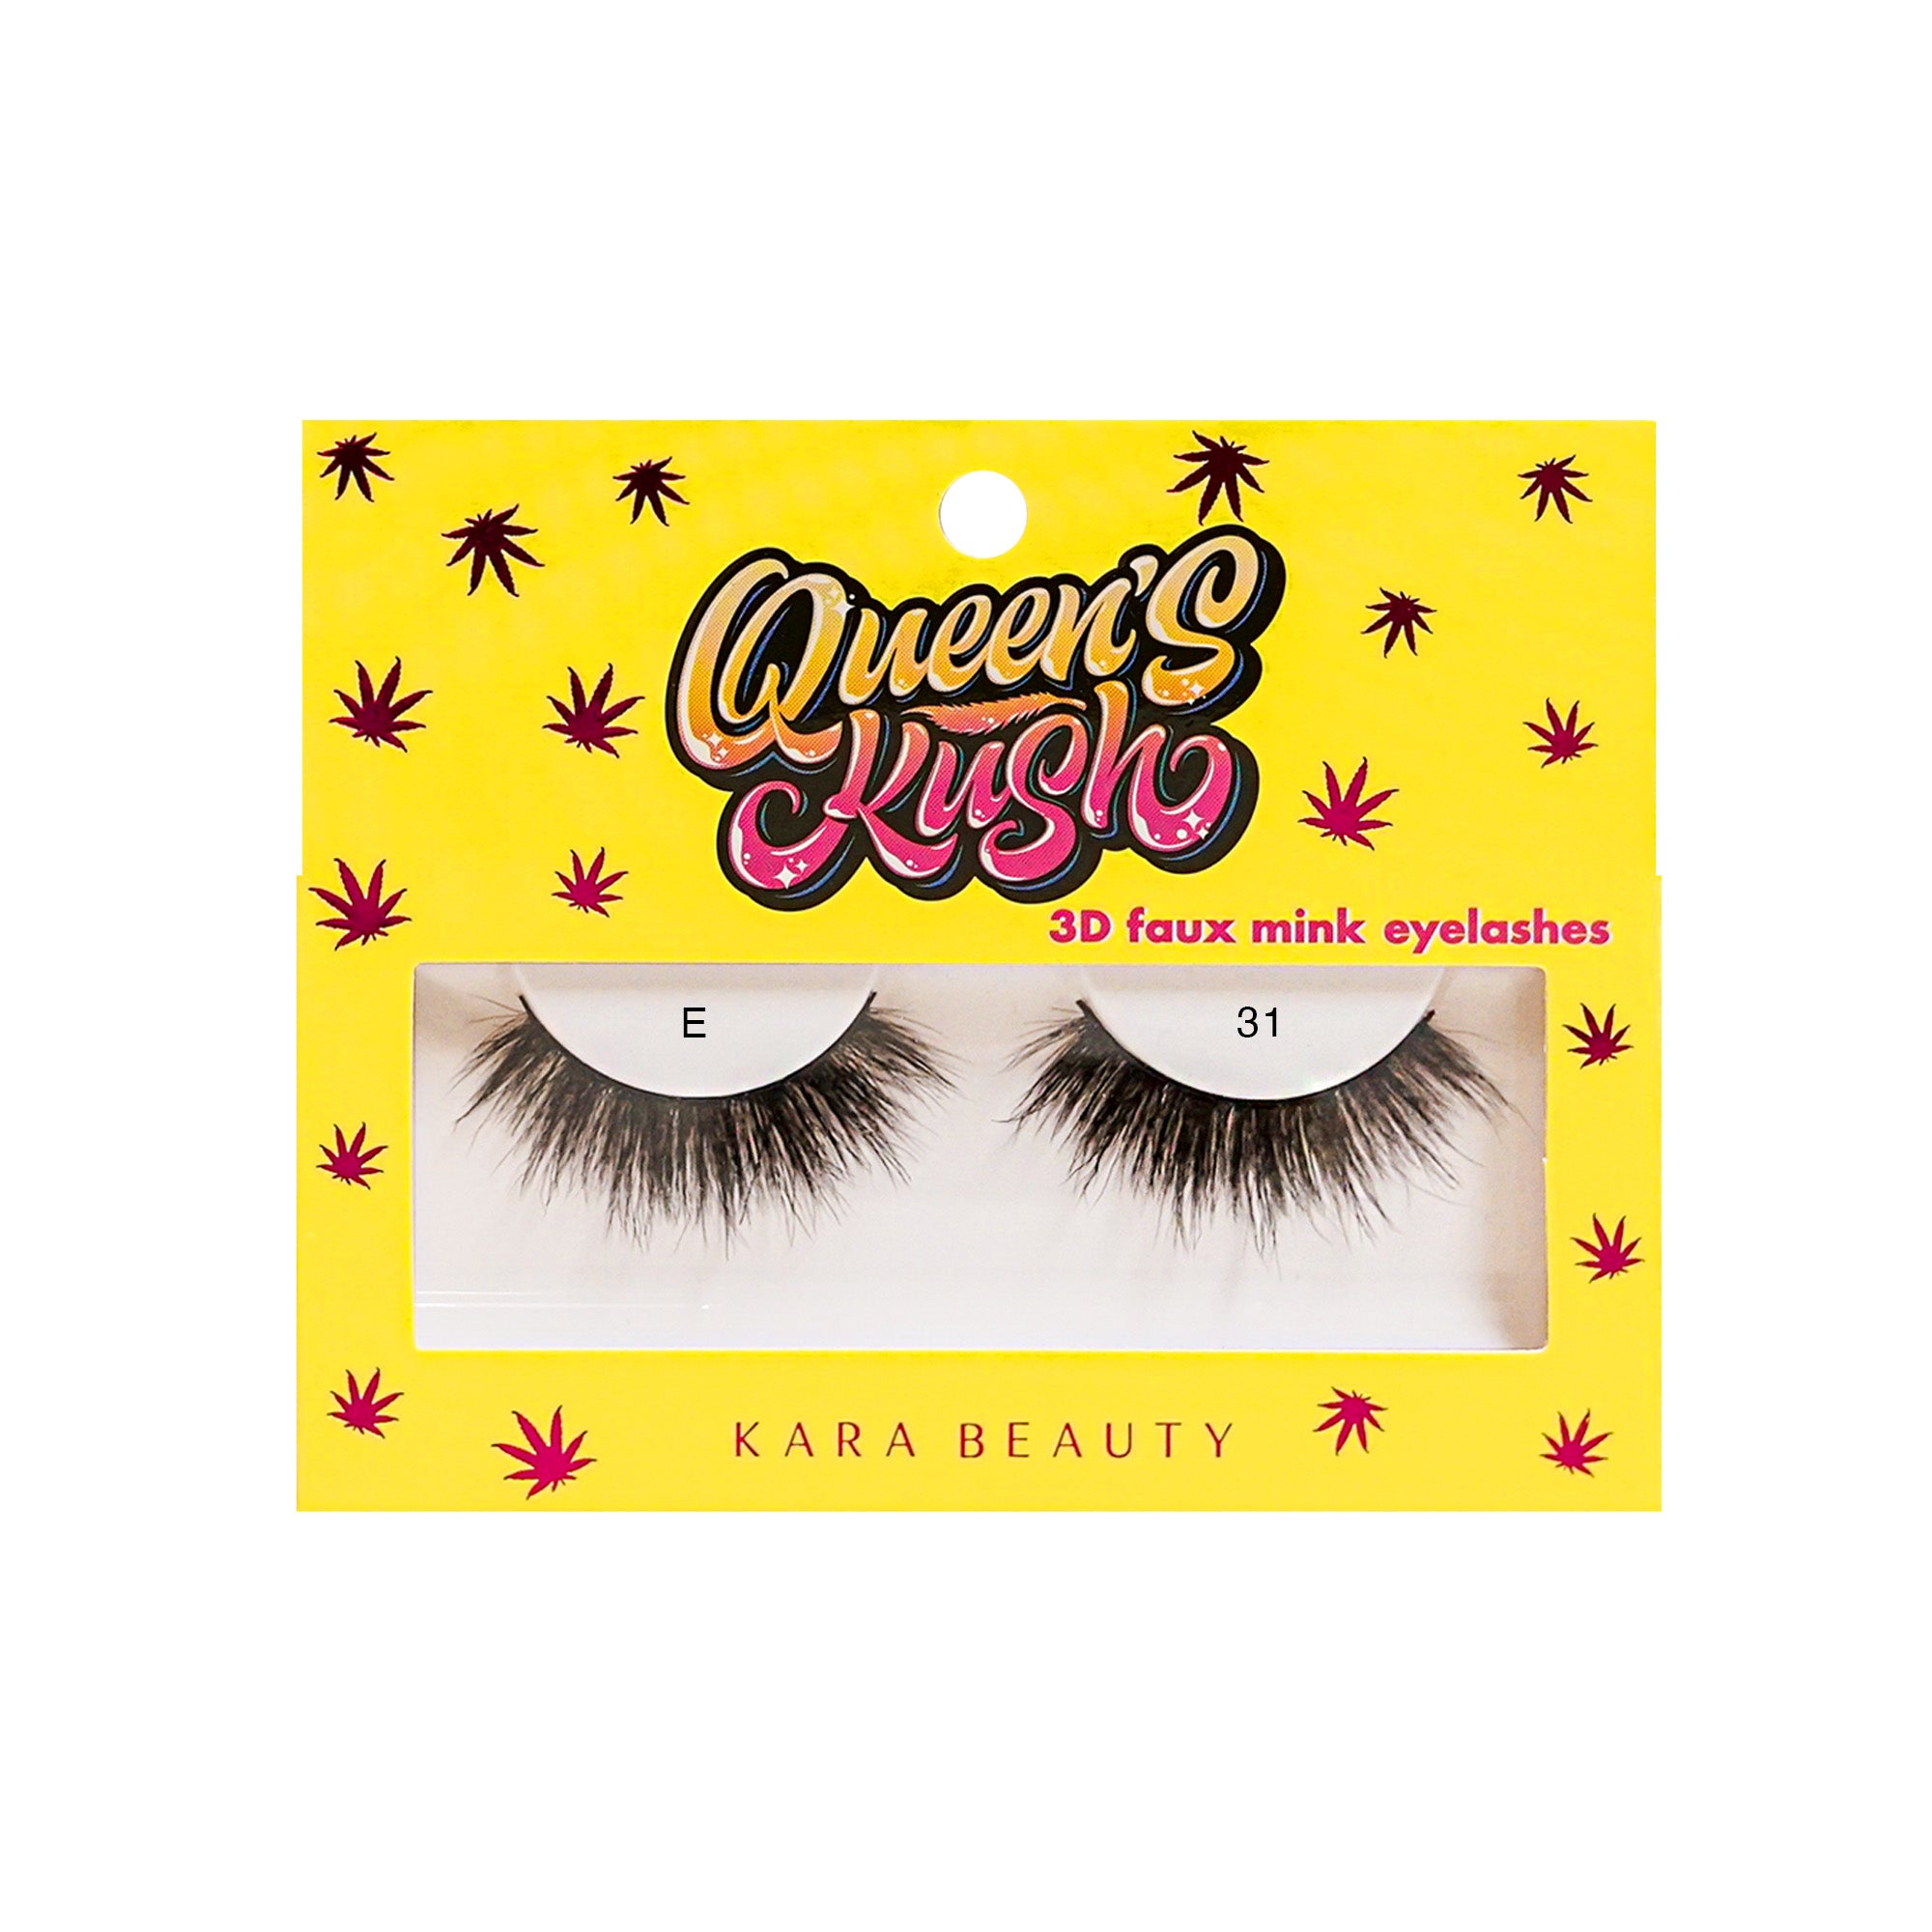 PUFF, PUFF COLLECTION Individual Lashes